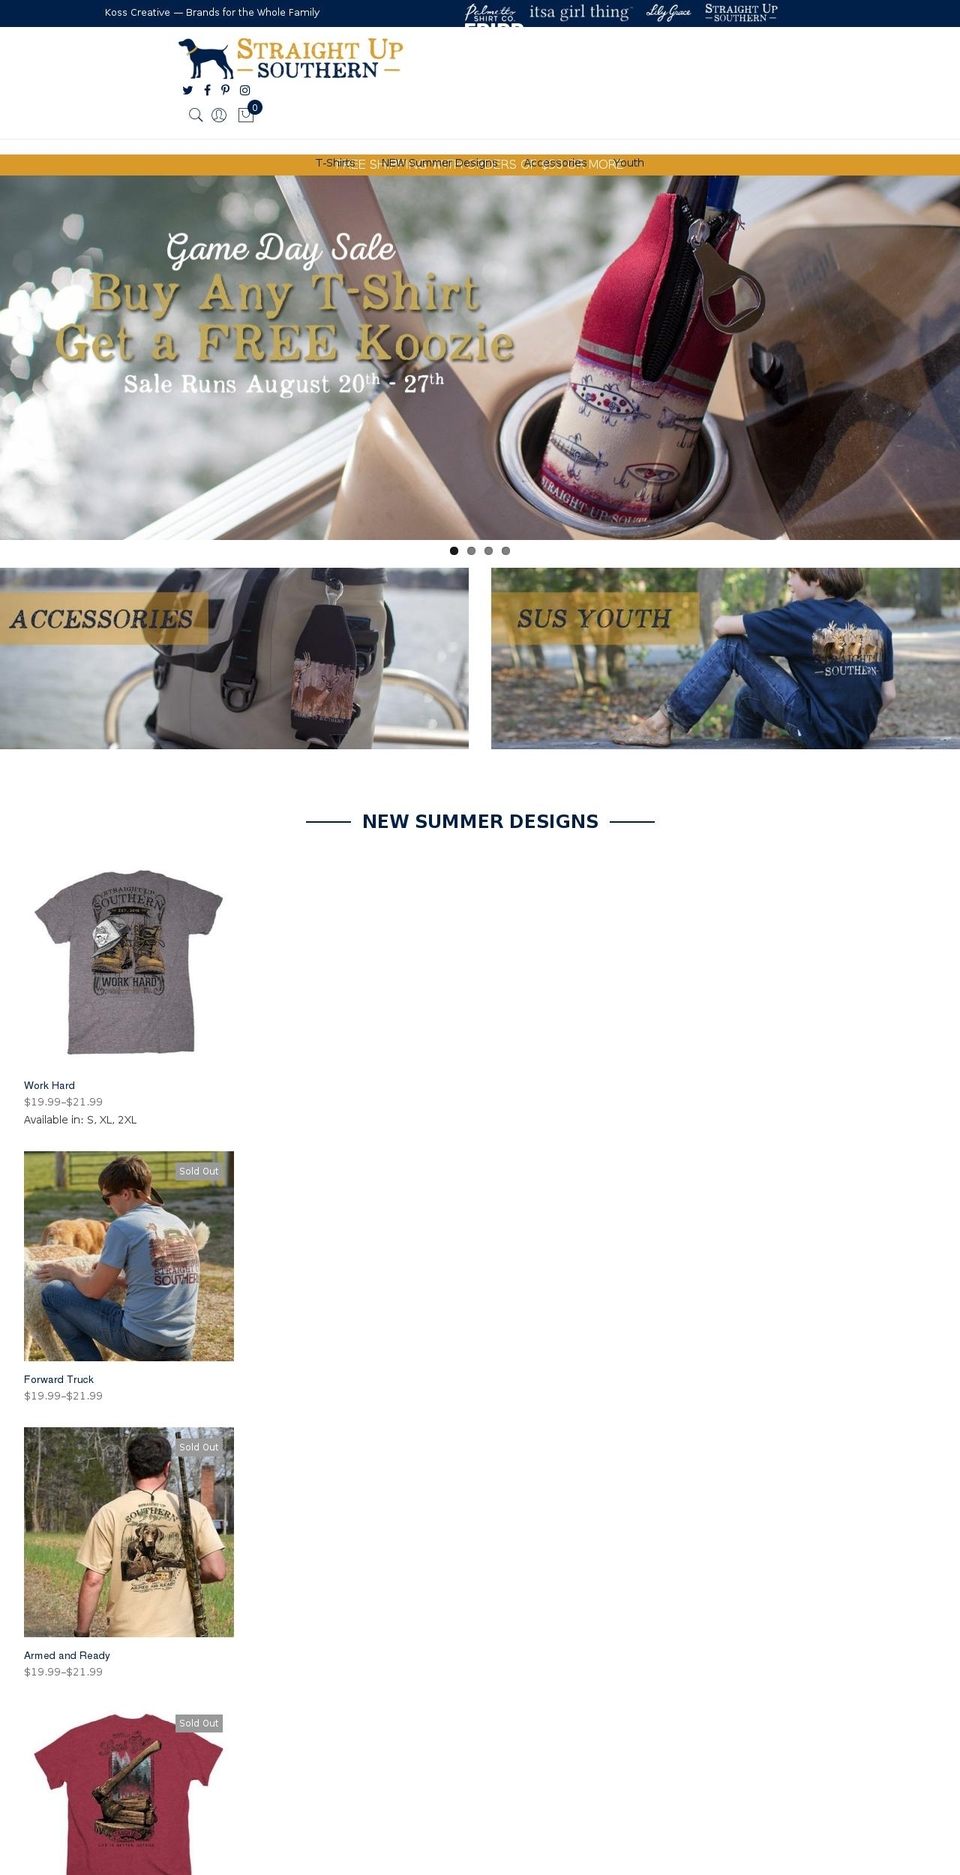 Kalles Shopify theme site example straightupsouthern.com